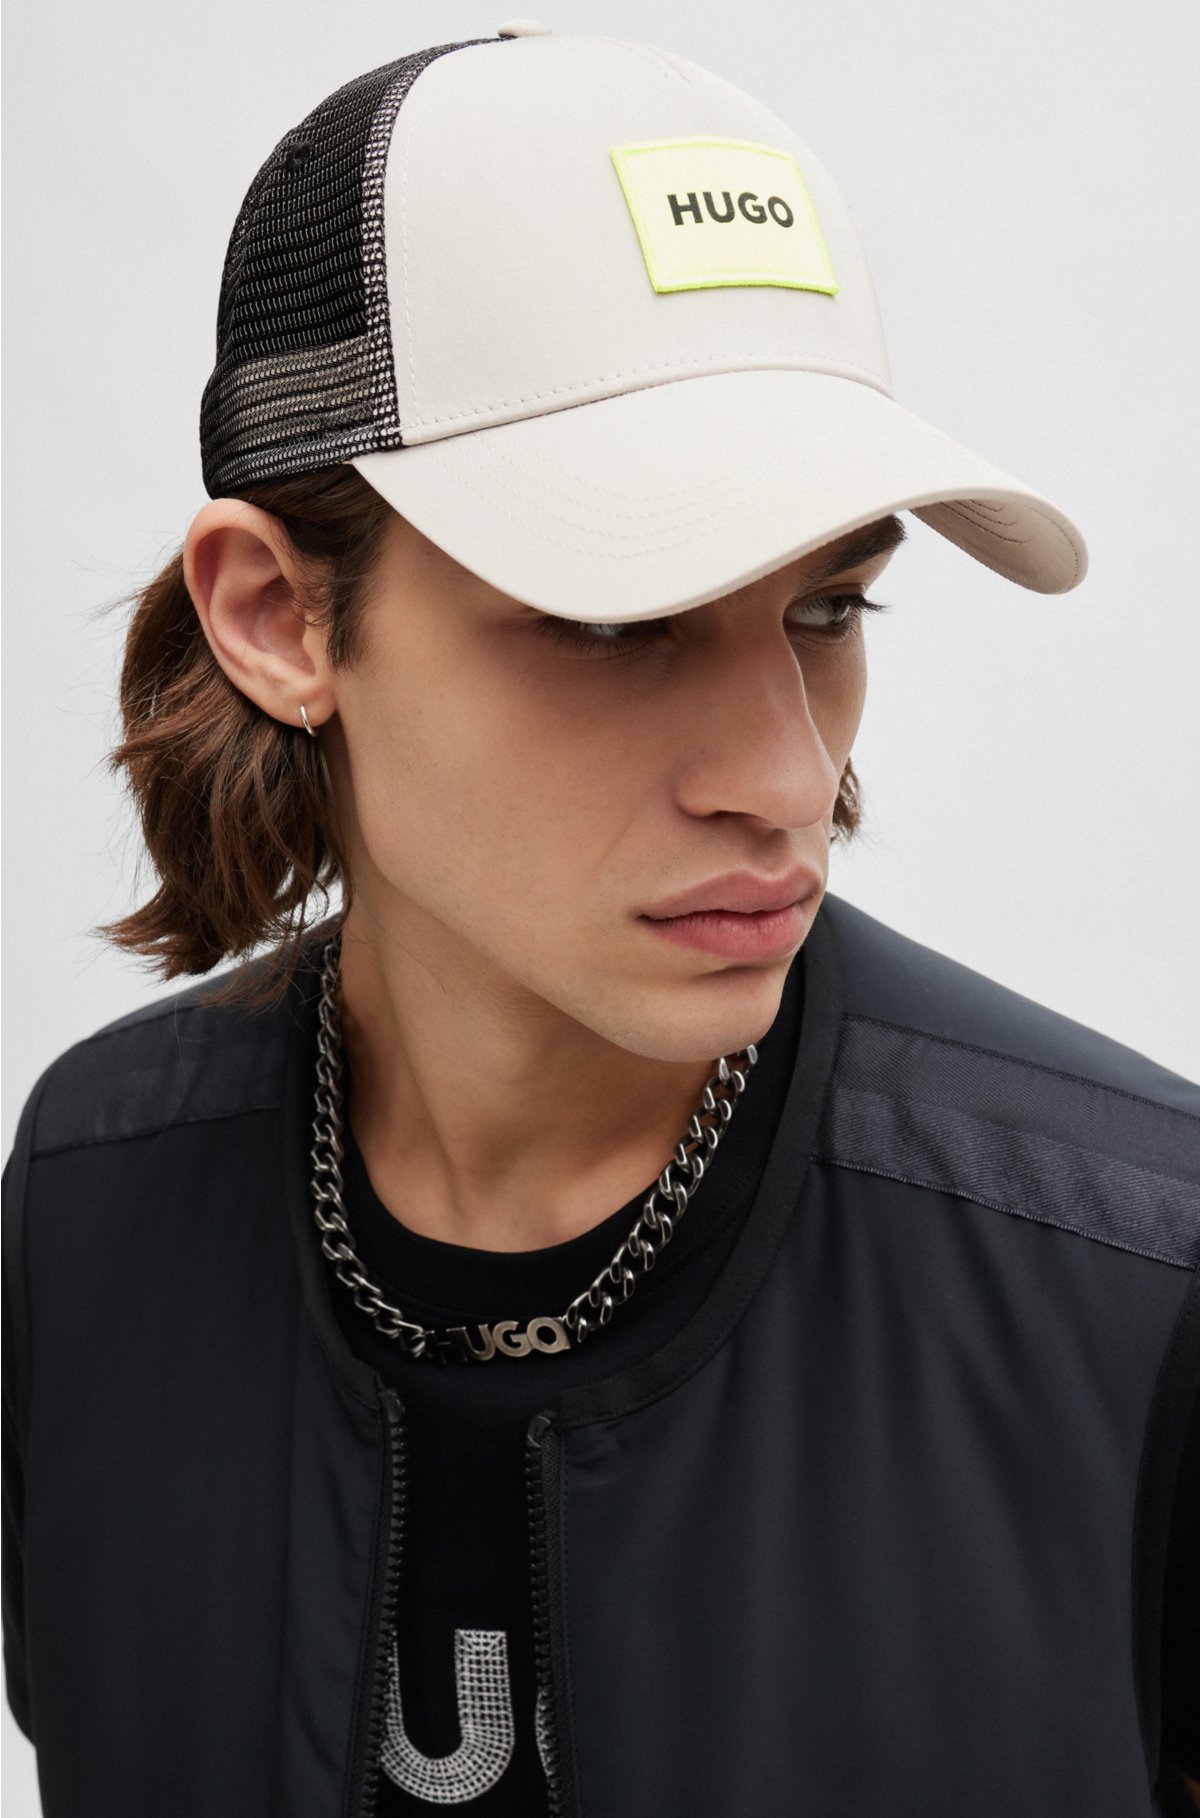 Twill trucker cap with logo label and snap back closure, Light Grey